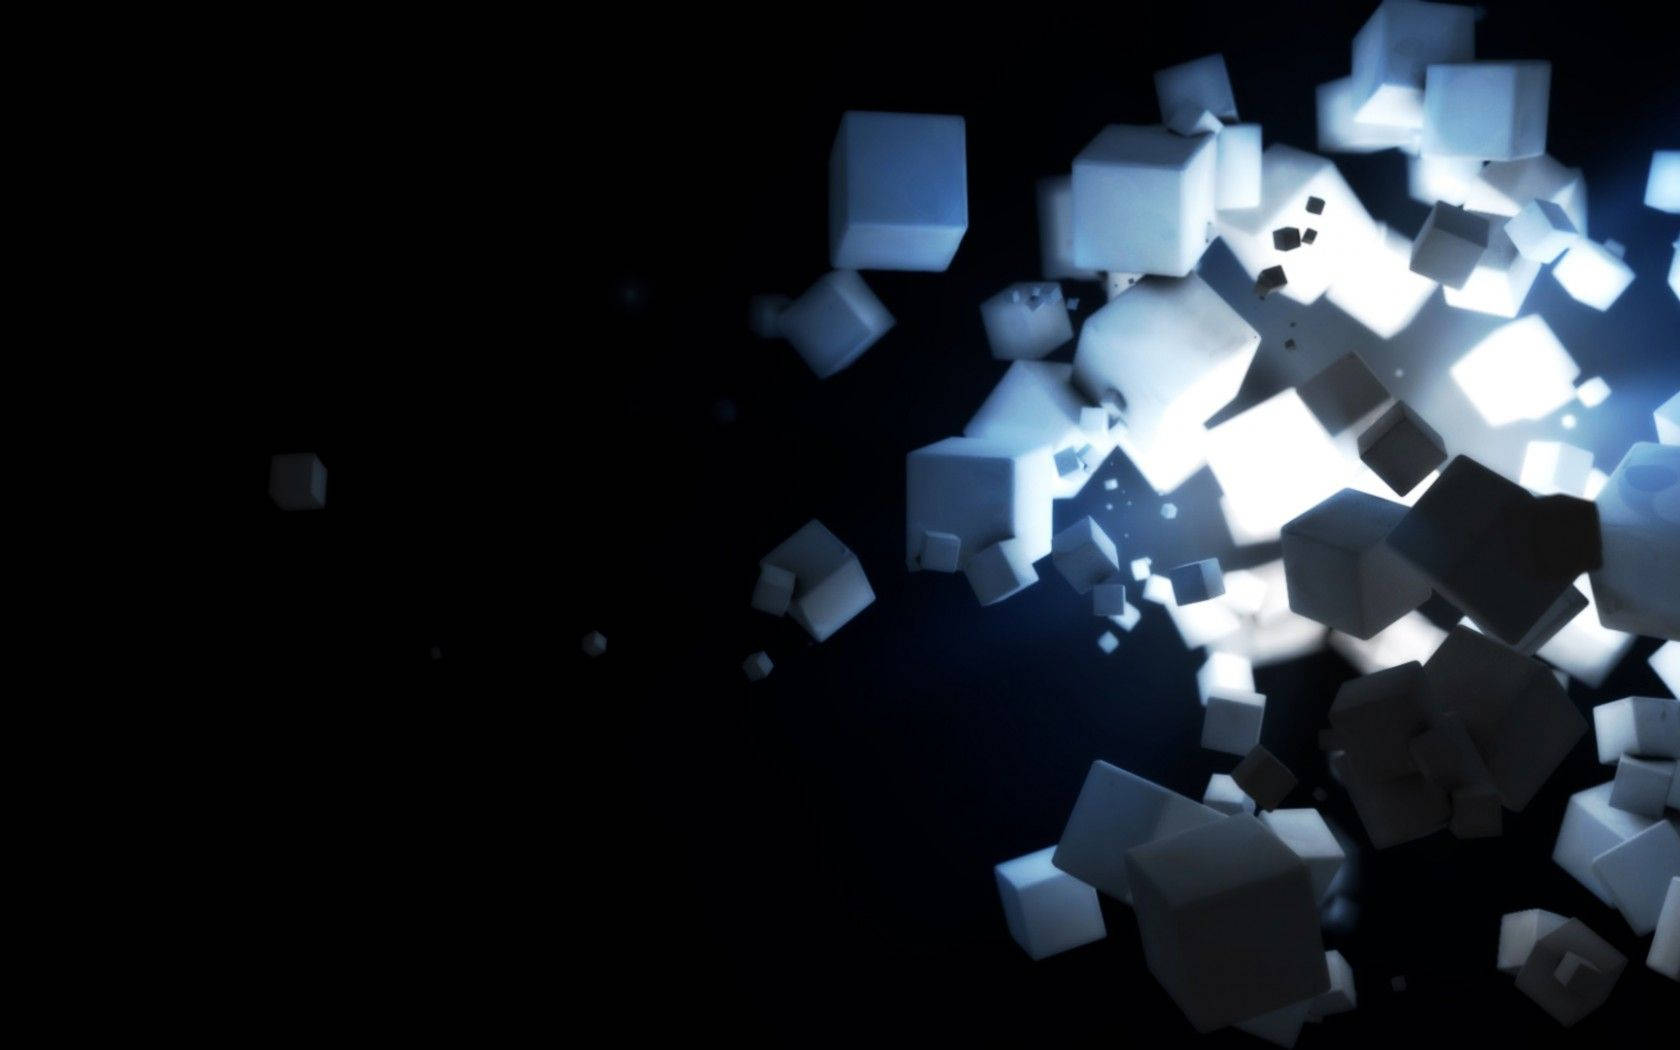 Cool Dark With White Cubes Wallpaper